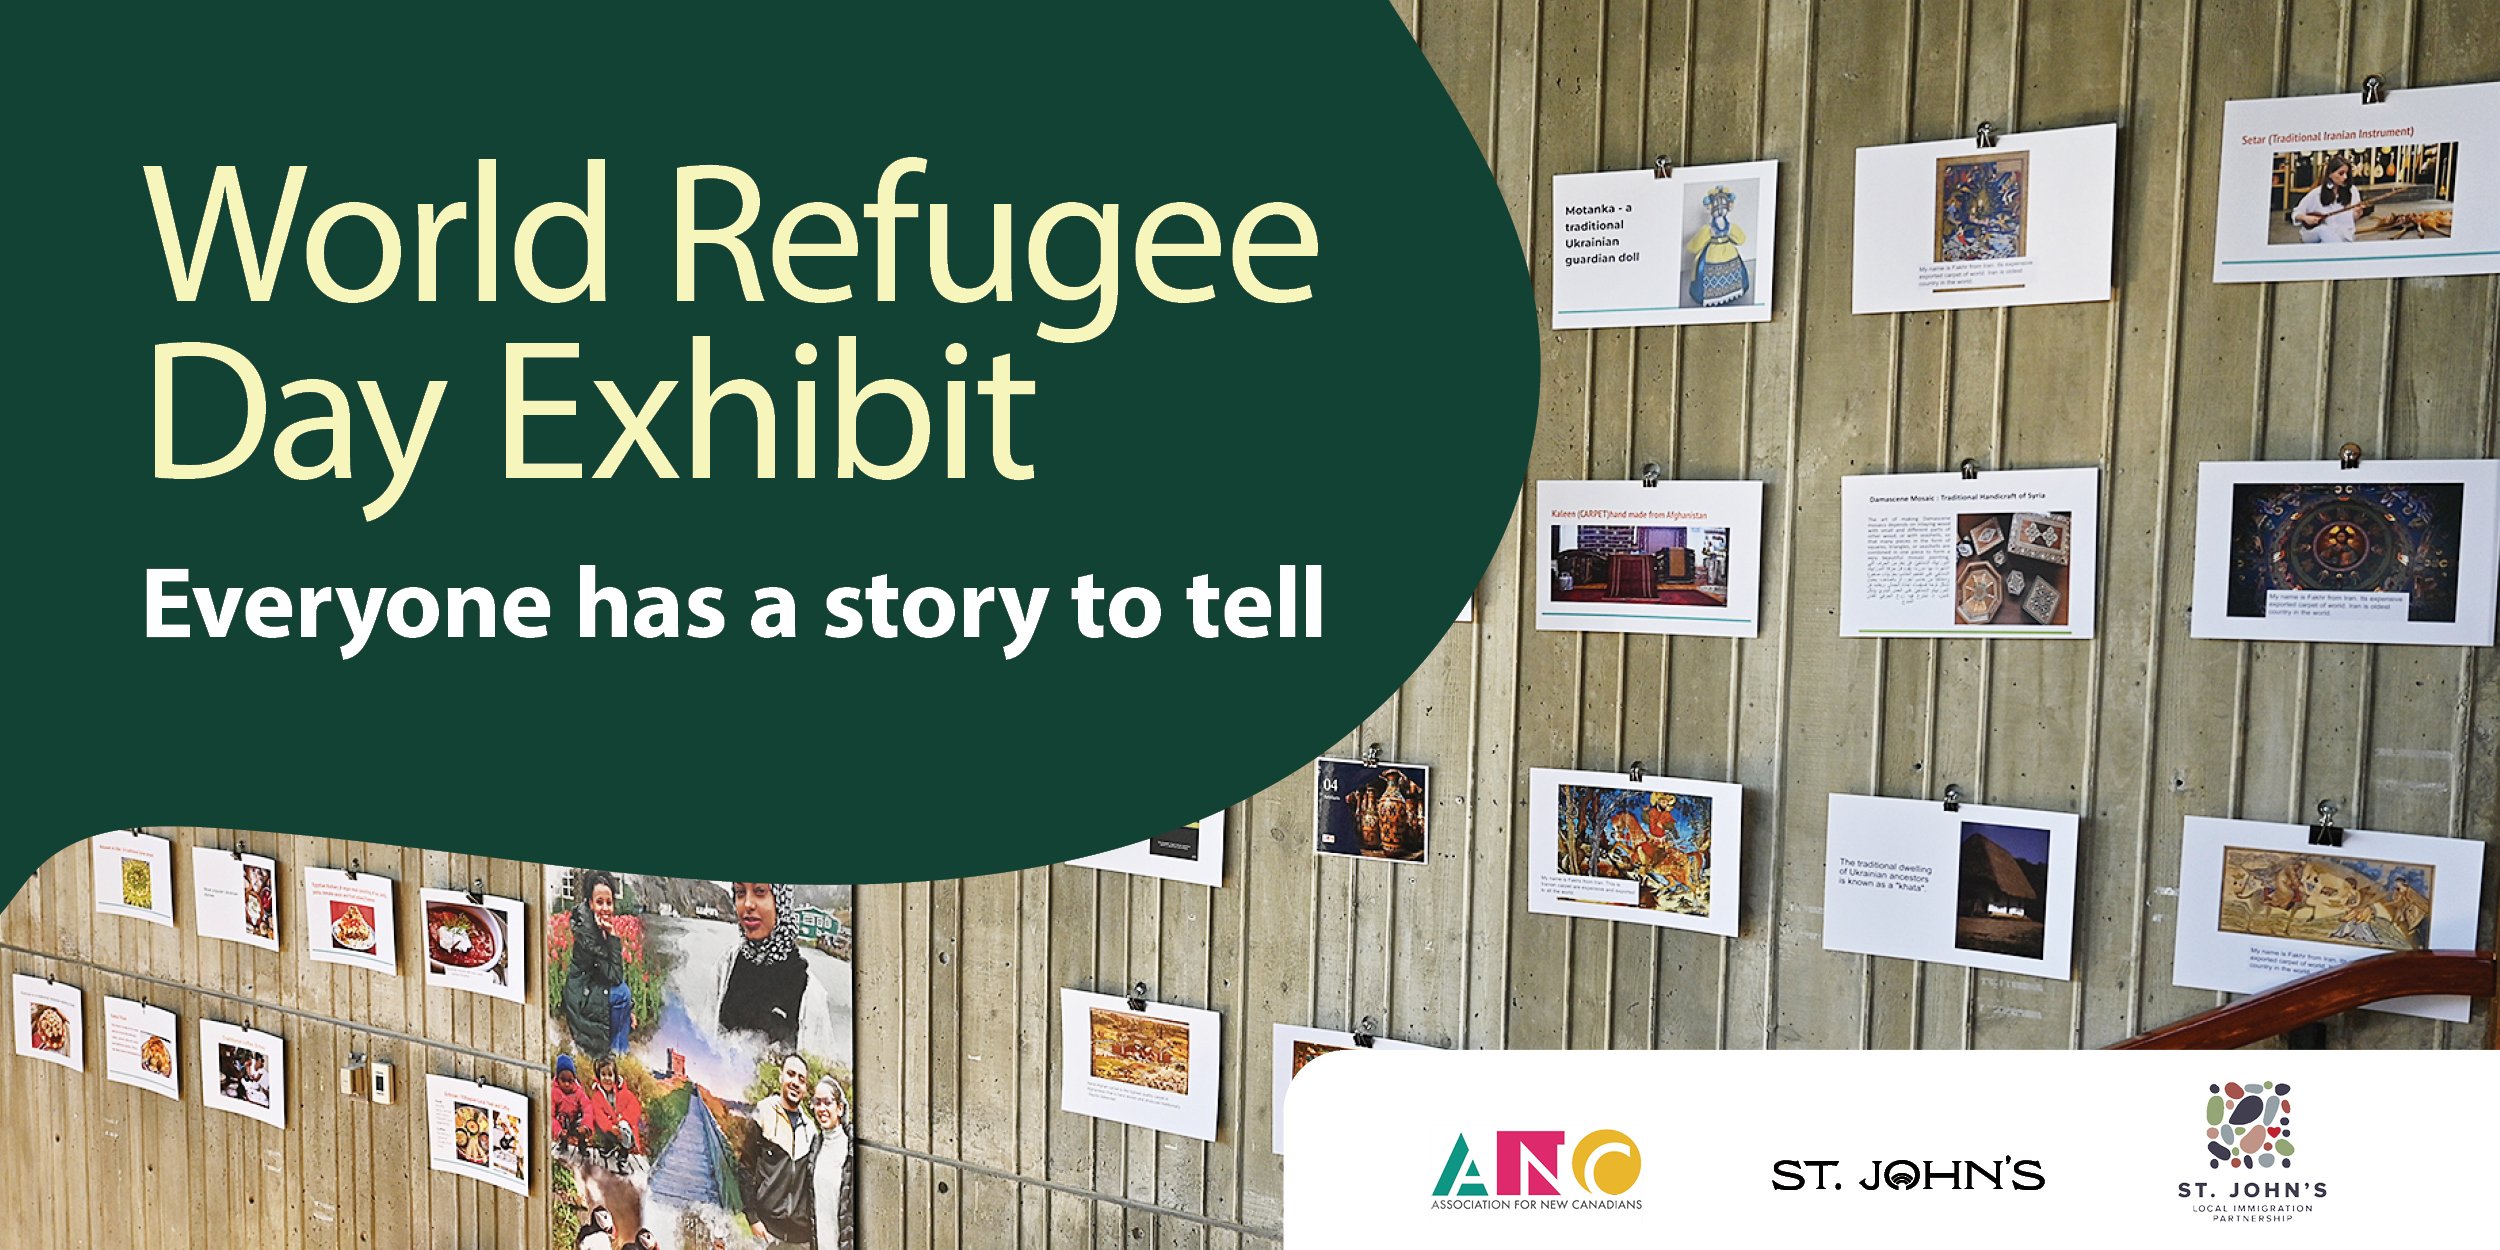 Graphic that says "World Refugee Day Exhibit Everyone has a story to tell" with an image of the exhibit in the background